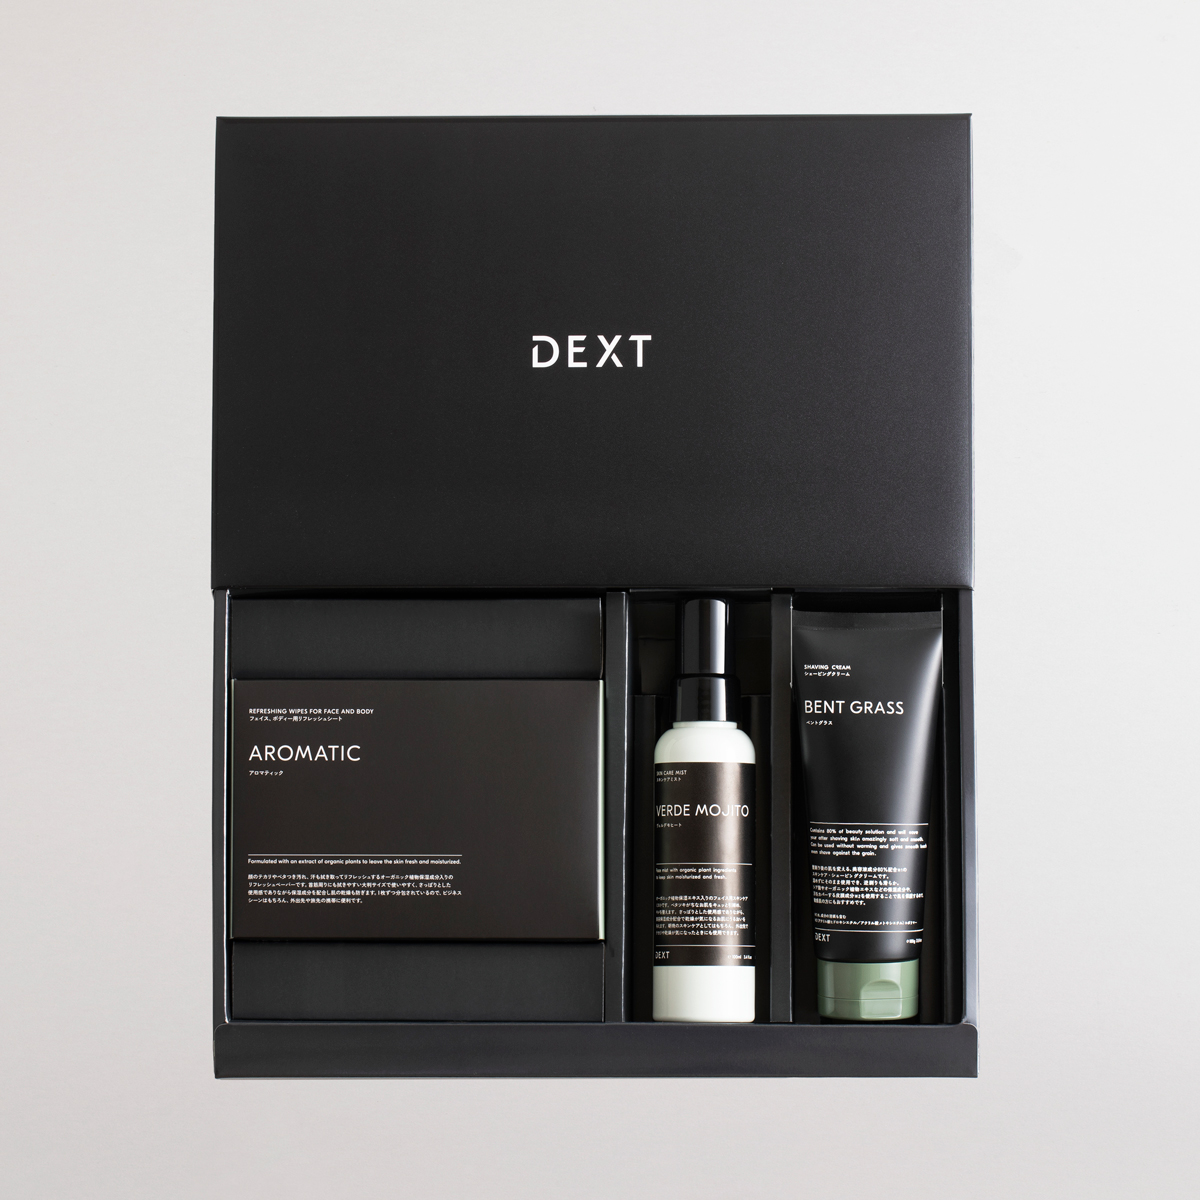 DEXT REFRESHING WIPES FOR FACE AND BODY (AROMATIC) & SKIN CARE MIST & Shaving Cream